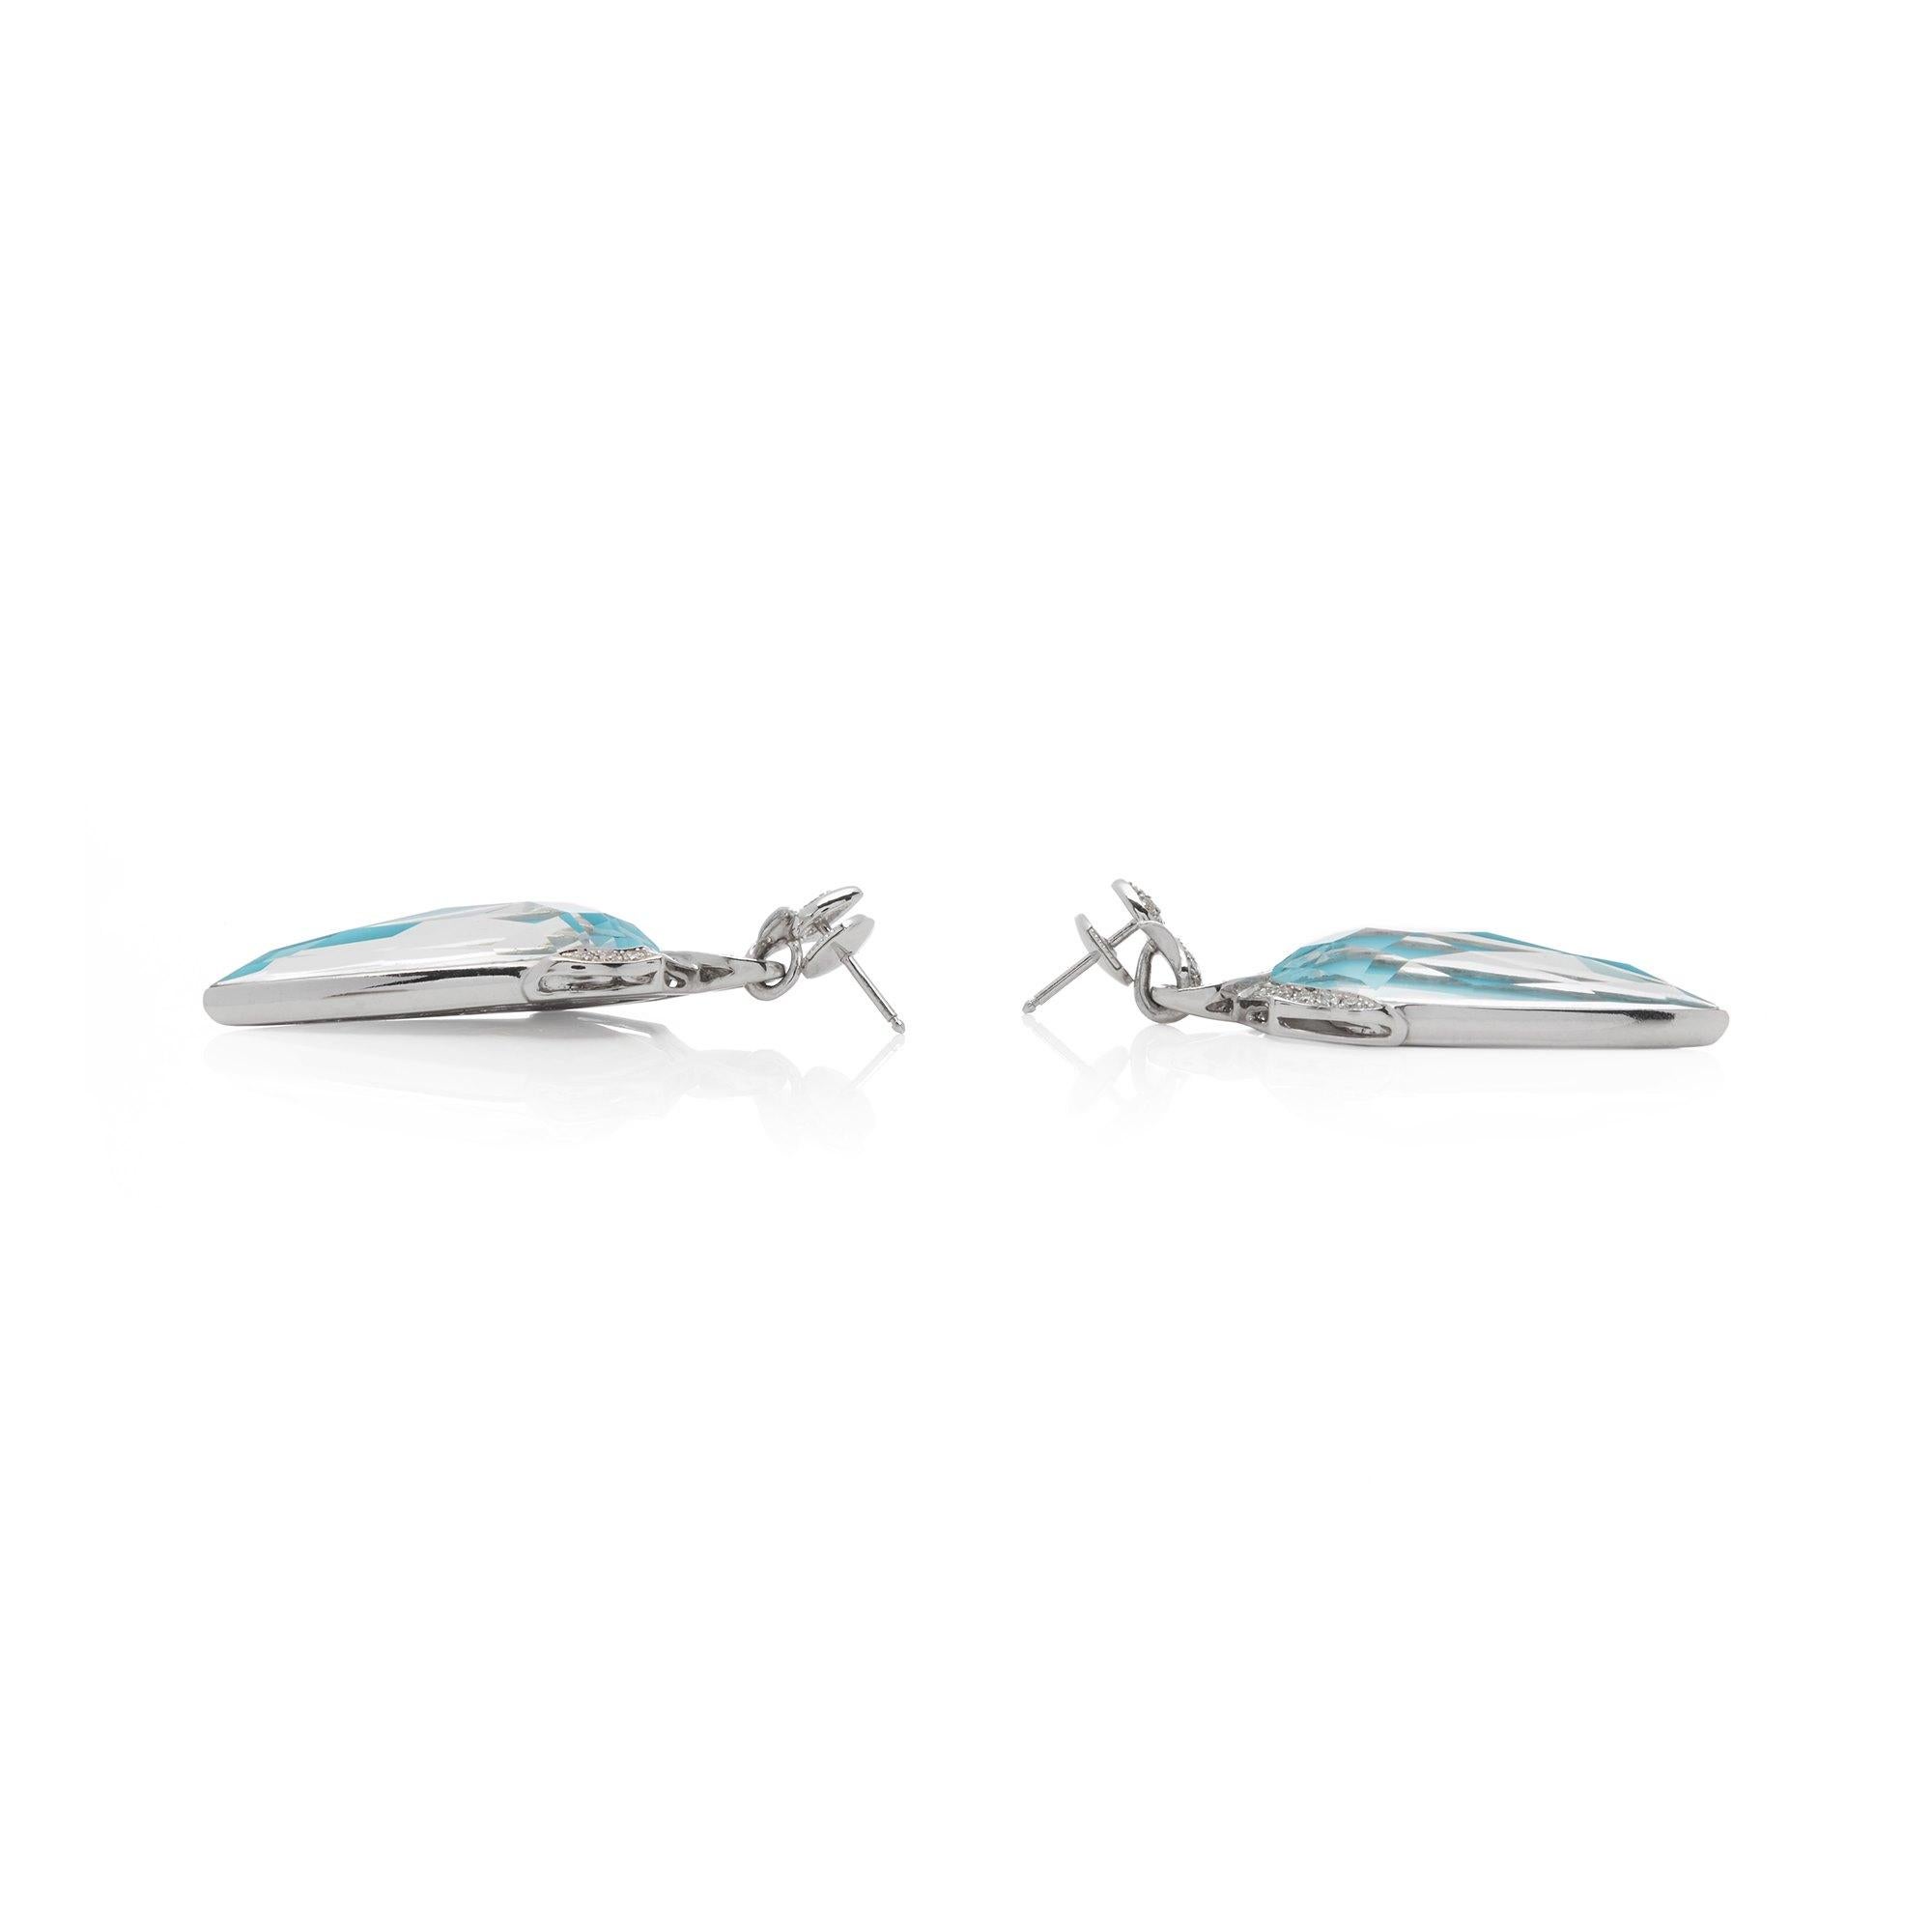 These earrings by Stephen Webster are from his Crystal Haze collection and feature two turquoise and quartz Crystal Haze stones accentuated by white diamonds. Set in white gold and with a post fitting. Complete with Xupes presentation box. Our Xupes